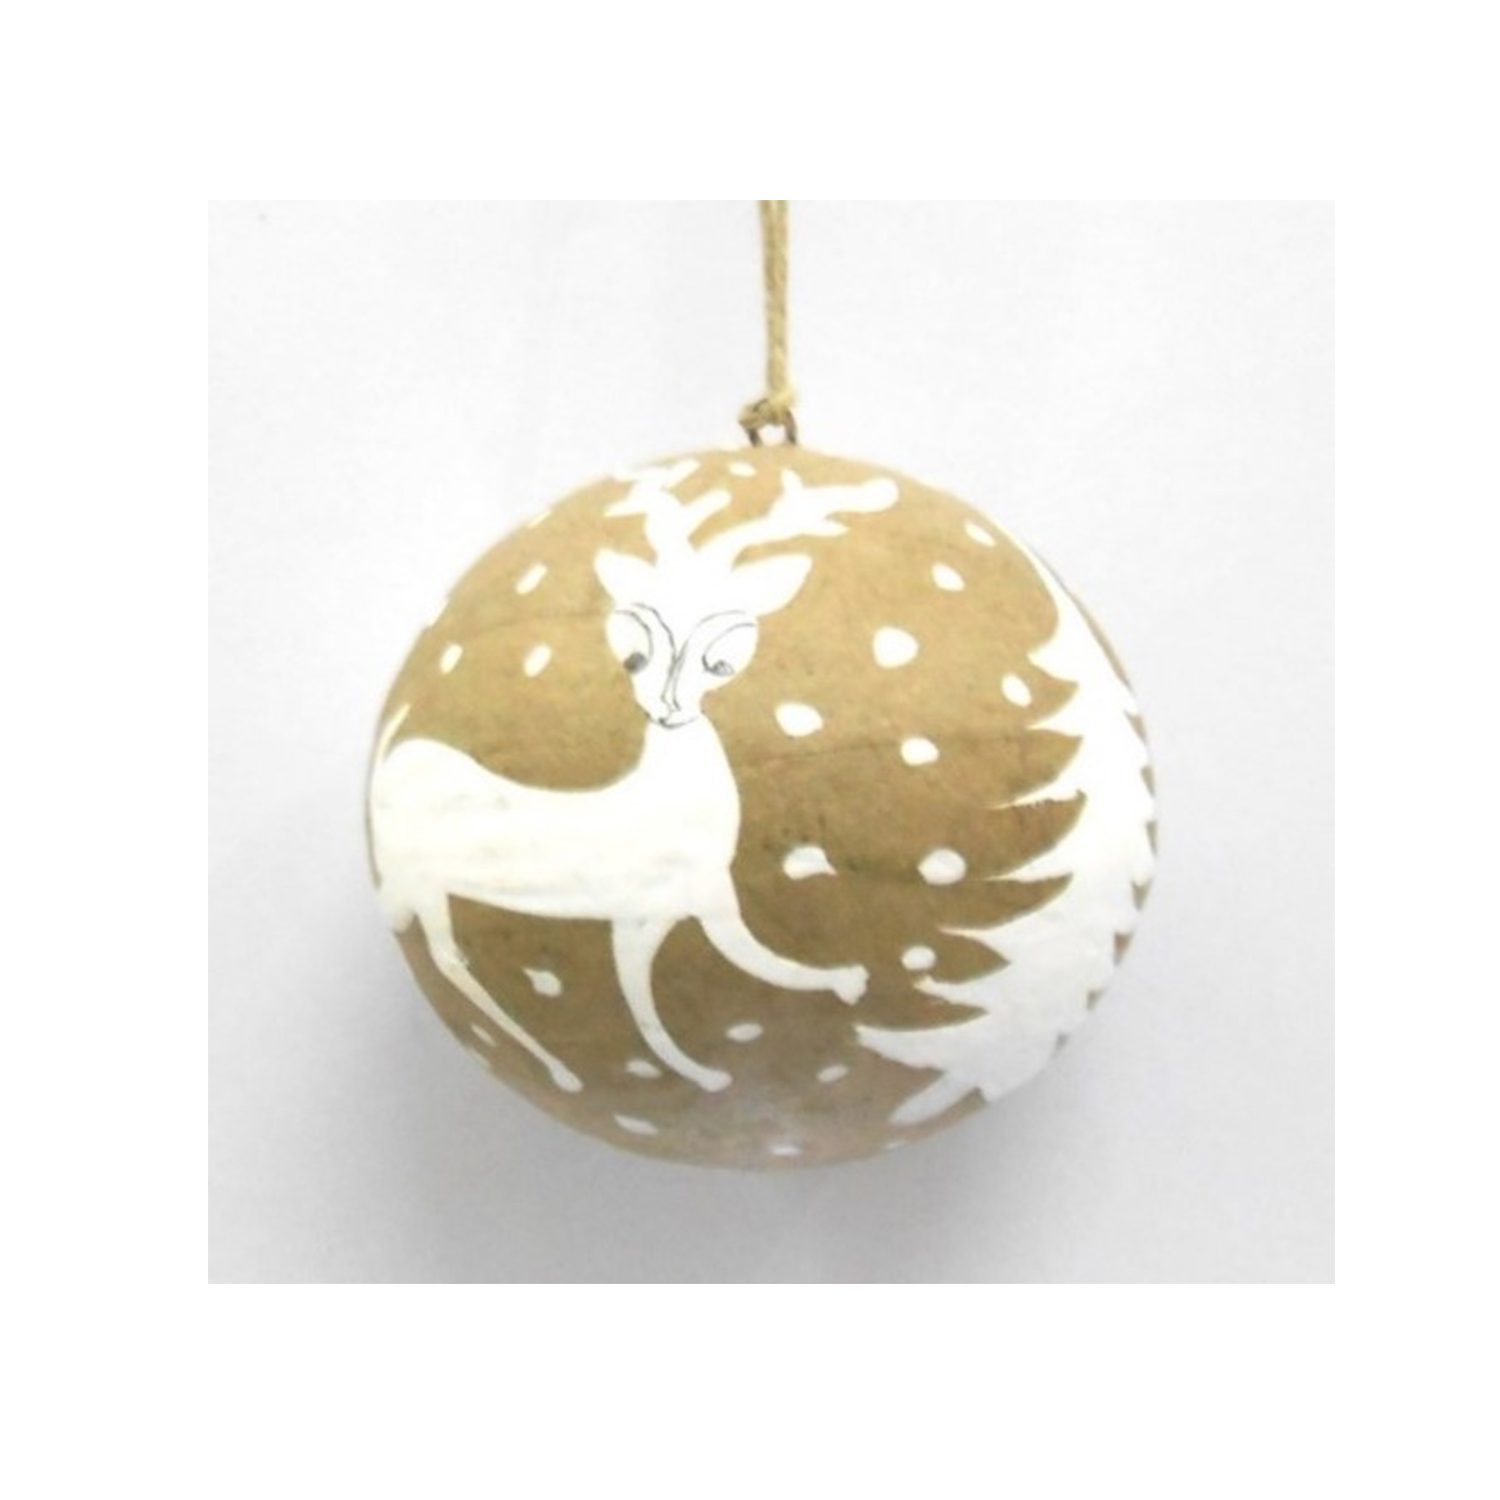 Rena Christmas Tree Decoration,Gold and White